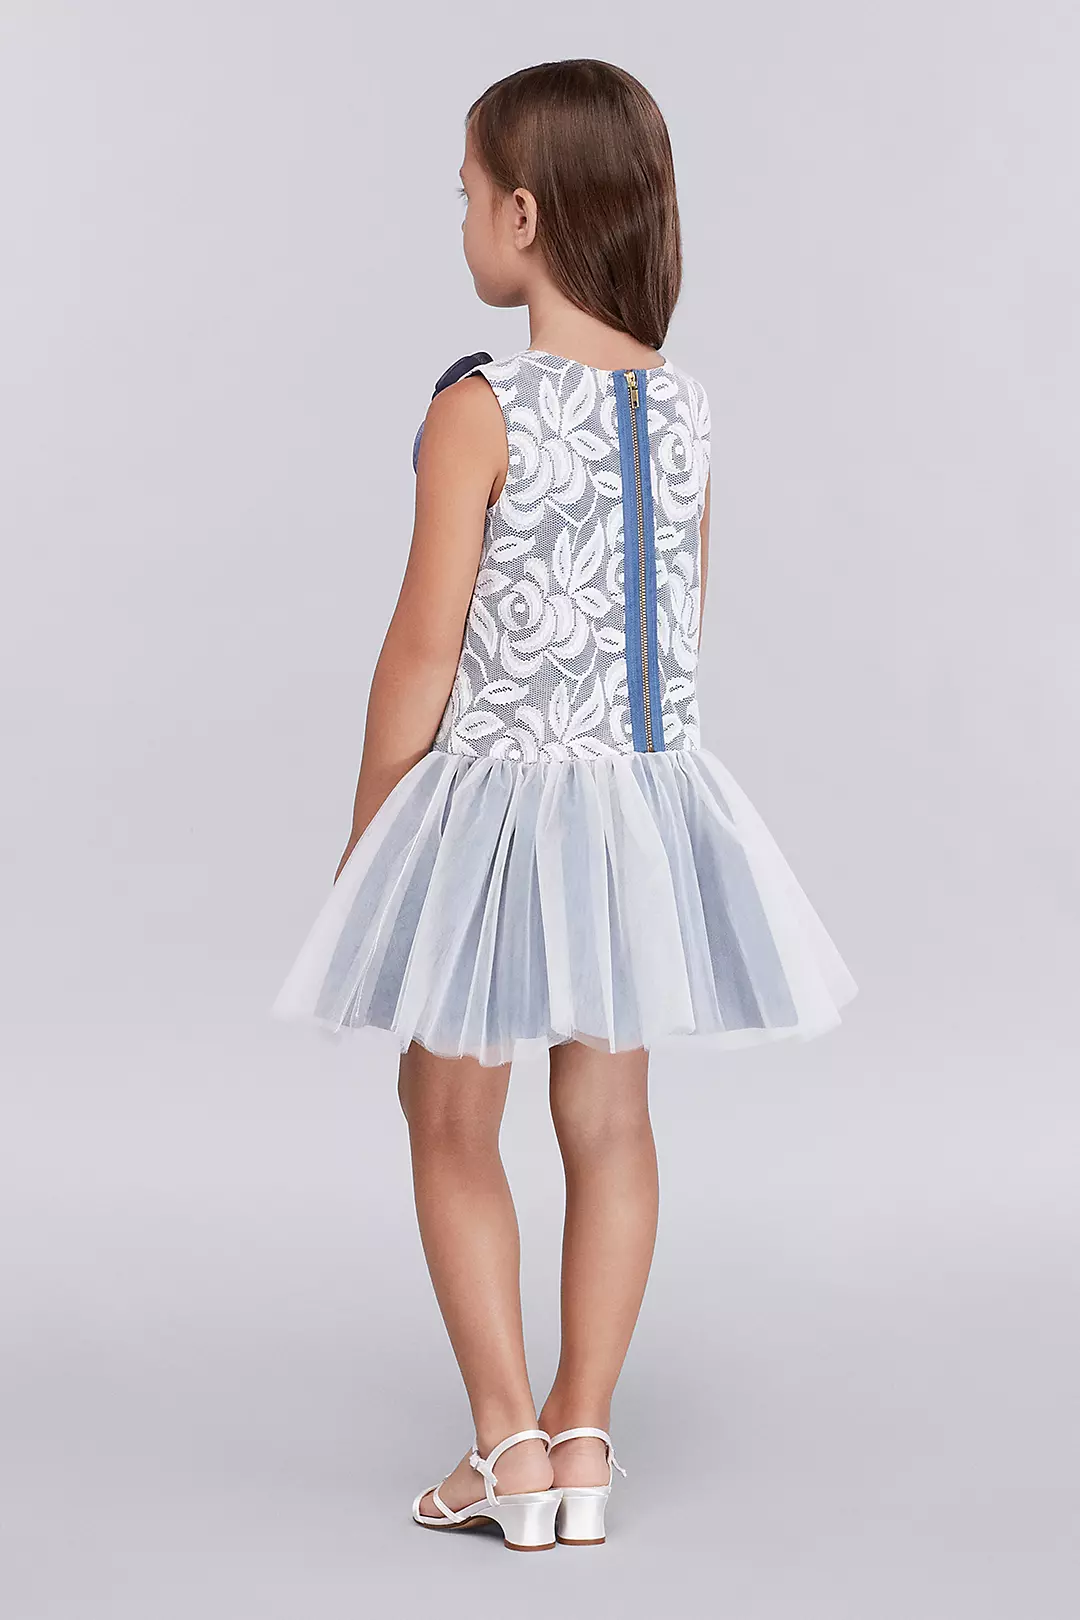 Lace Girls Dress with Tulle Skirt Image 2